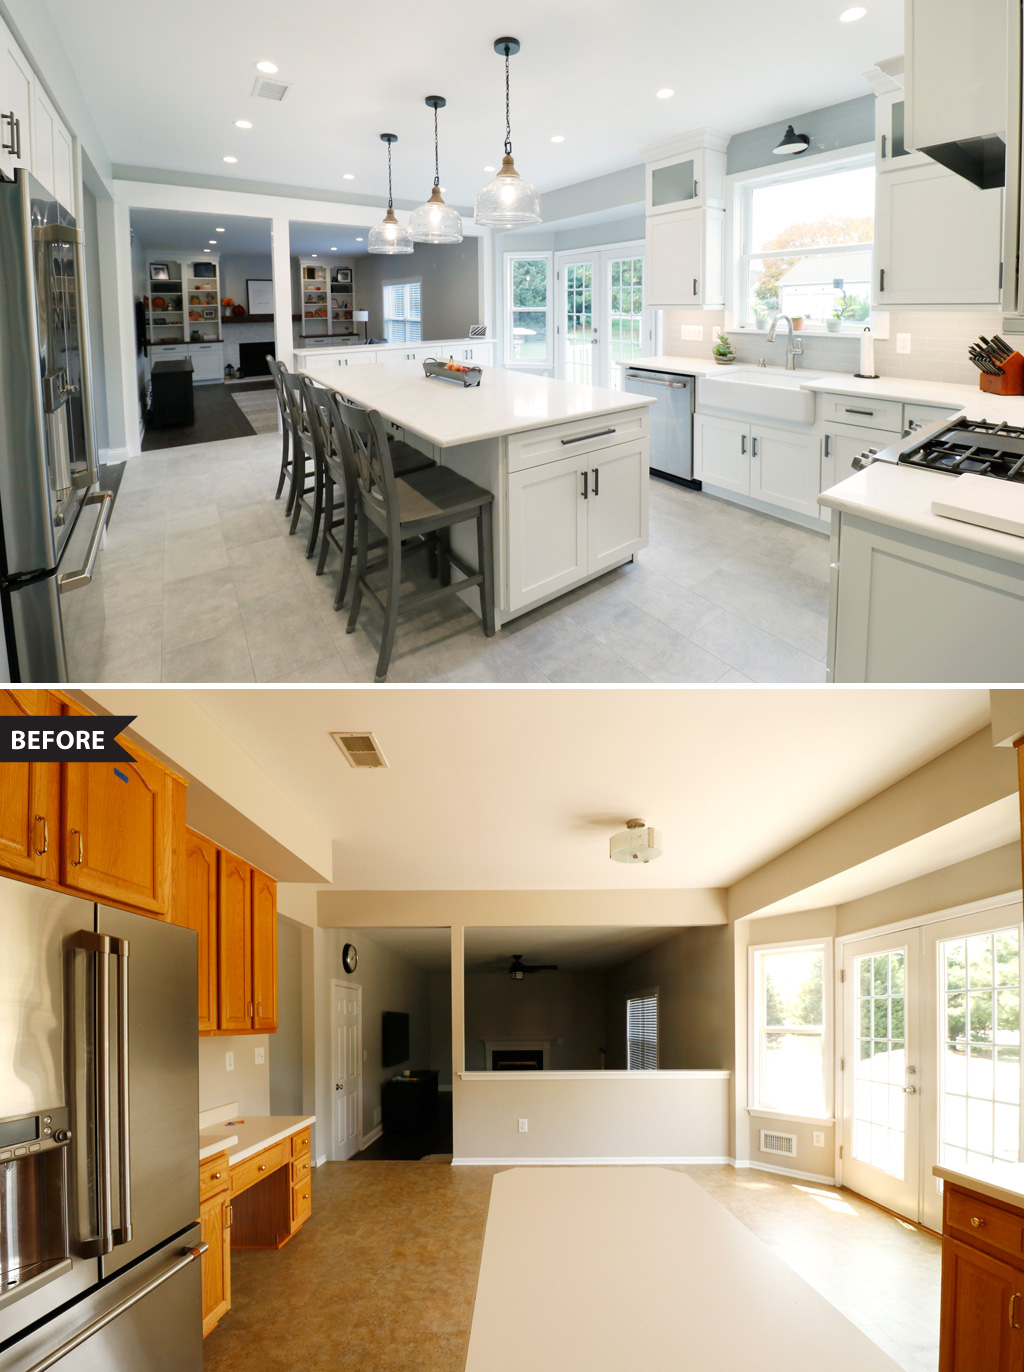 Before and After Photos of a Kitchen Remodeling Project in Robbinsville NY by Rasinski Construction